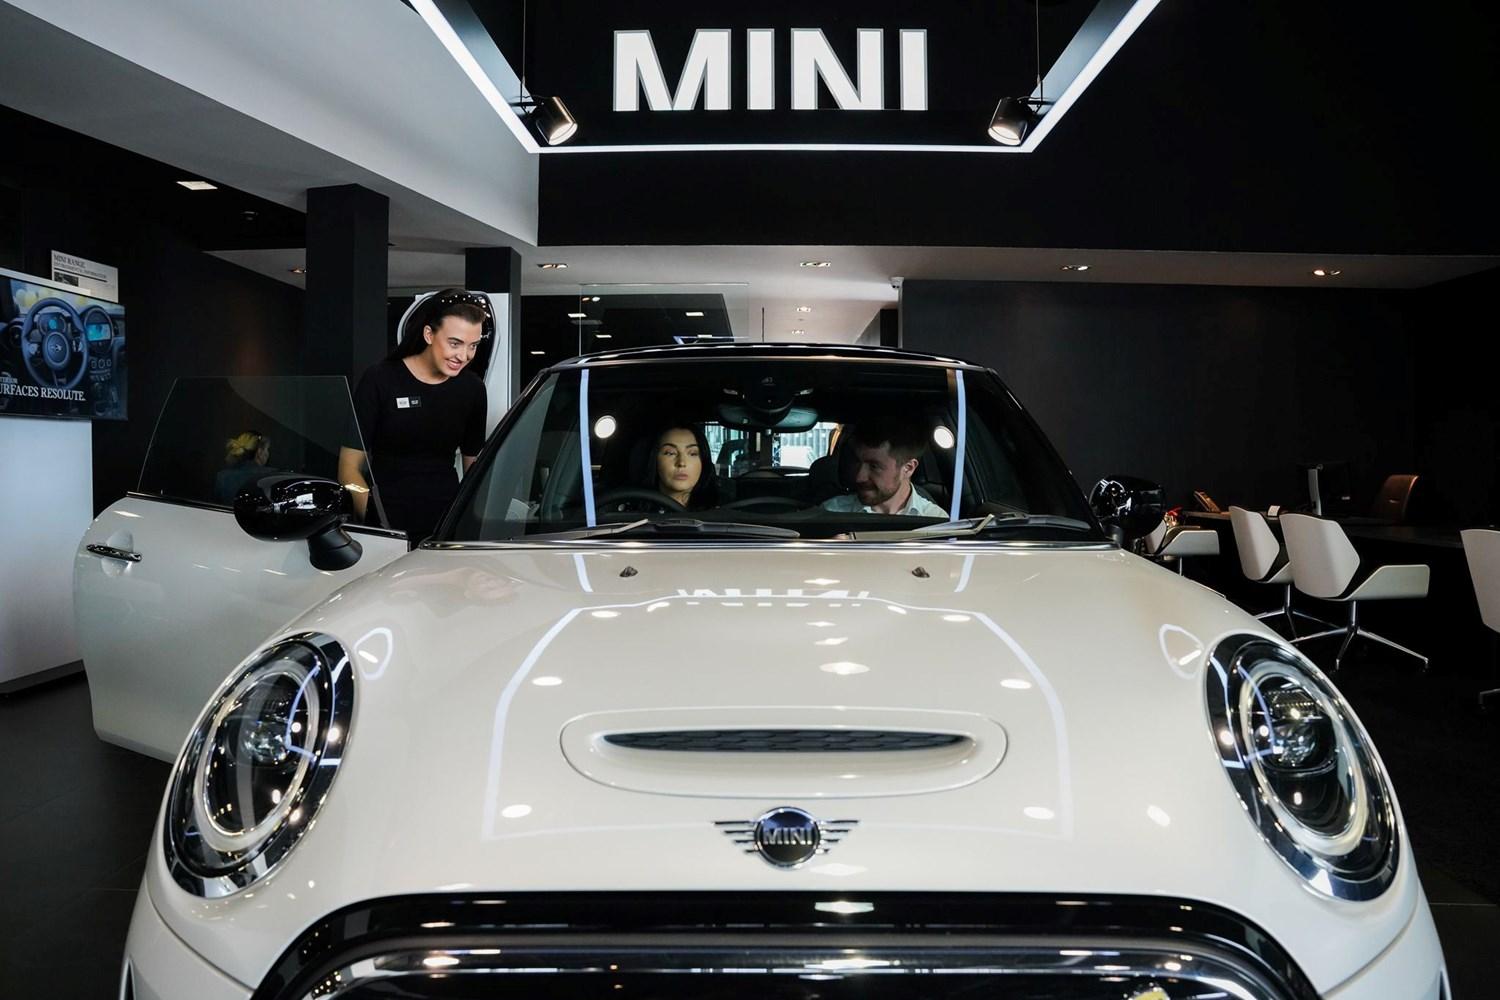 MINI Sales Specialist speaks to customers about the key features of the MINI Cooper as they sit inside of the vehicle at the Bavarian MINI Showroom